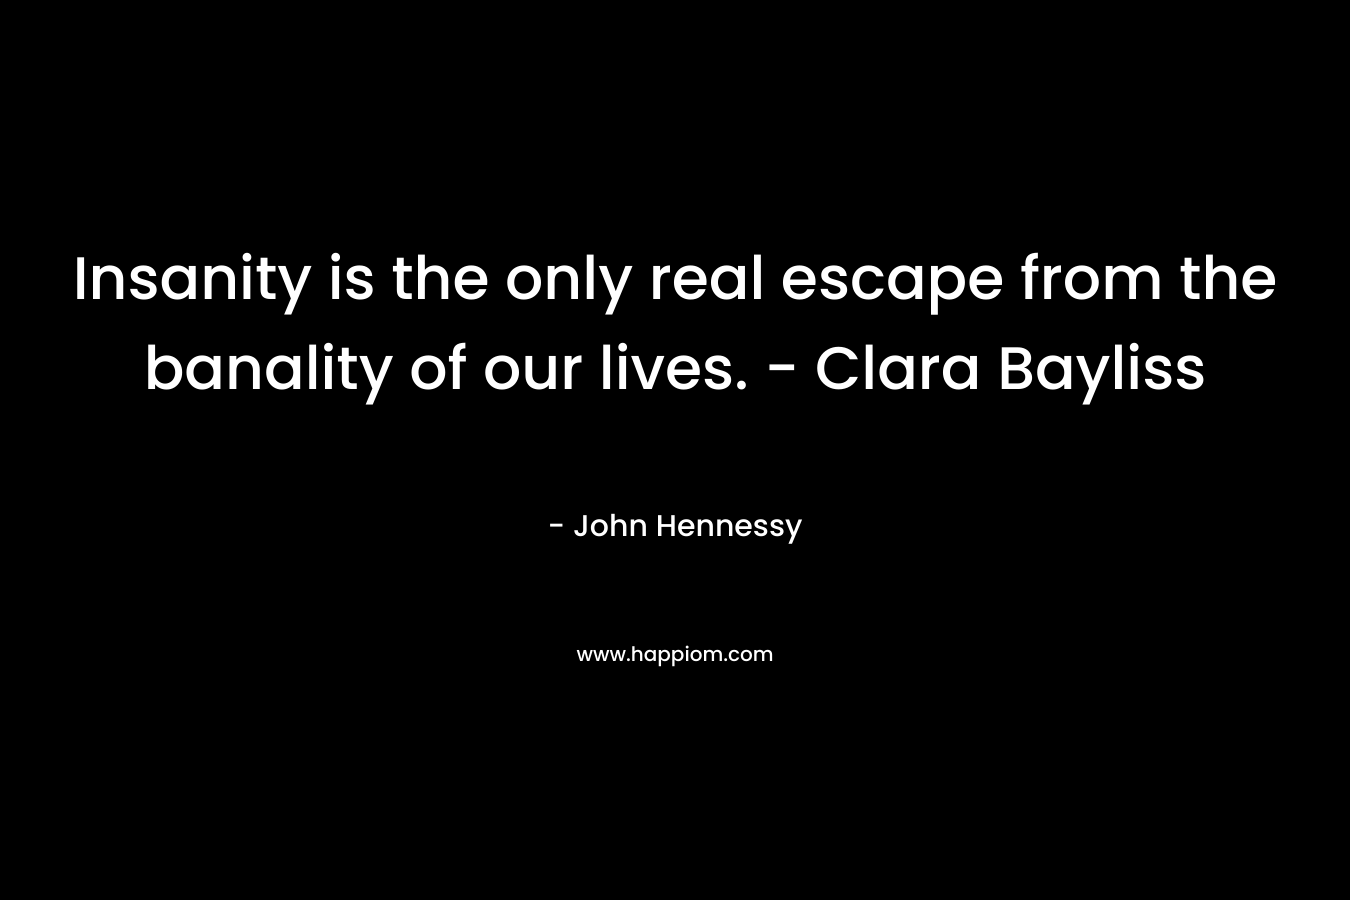 Insanity is the only real escape from the banality of our lives. - Clara Bayliss